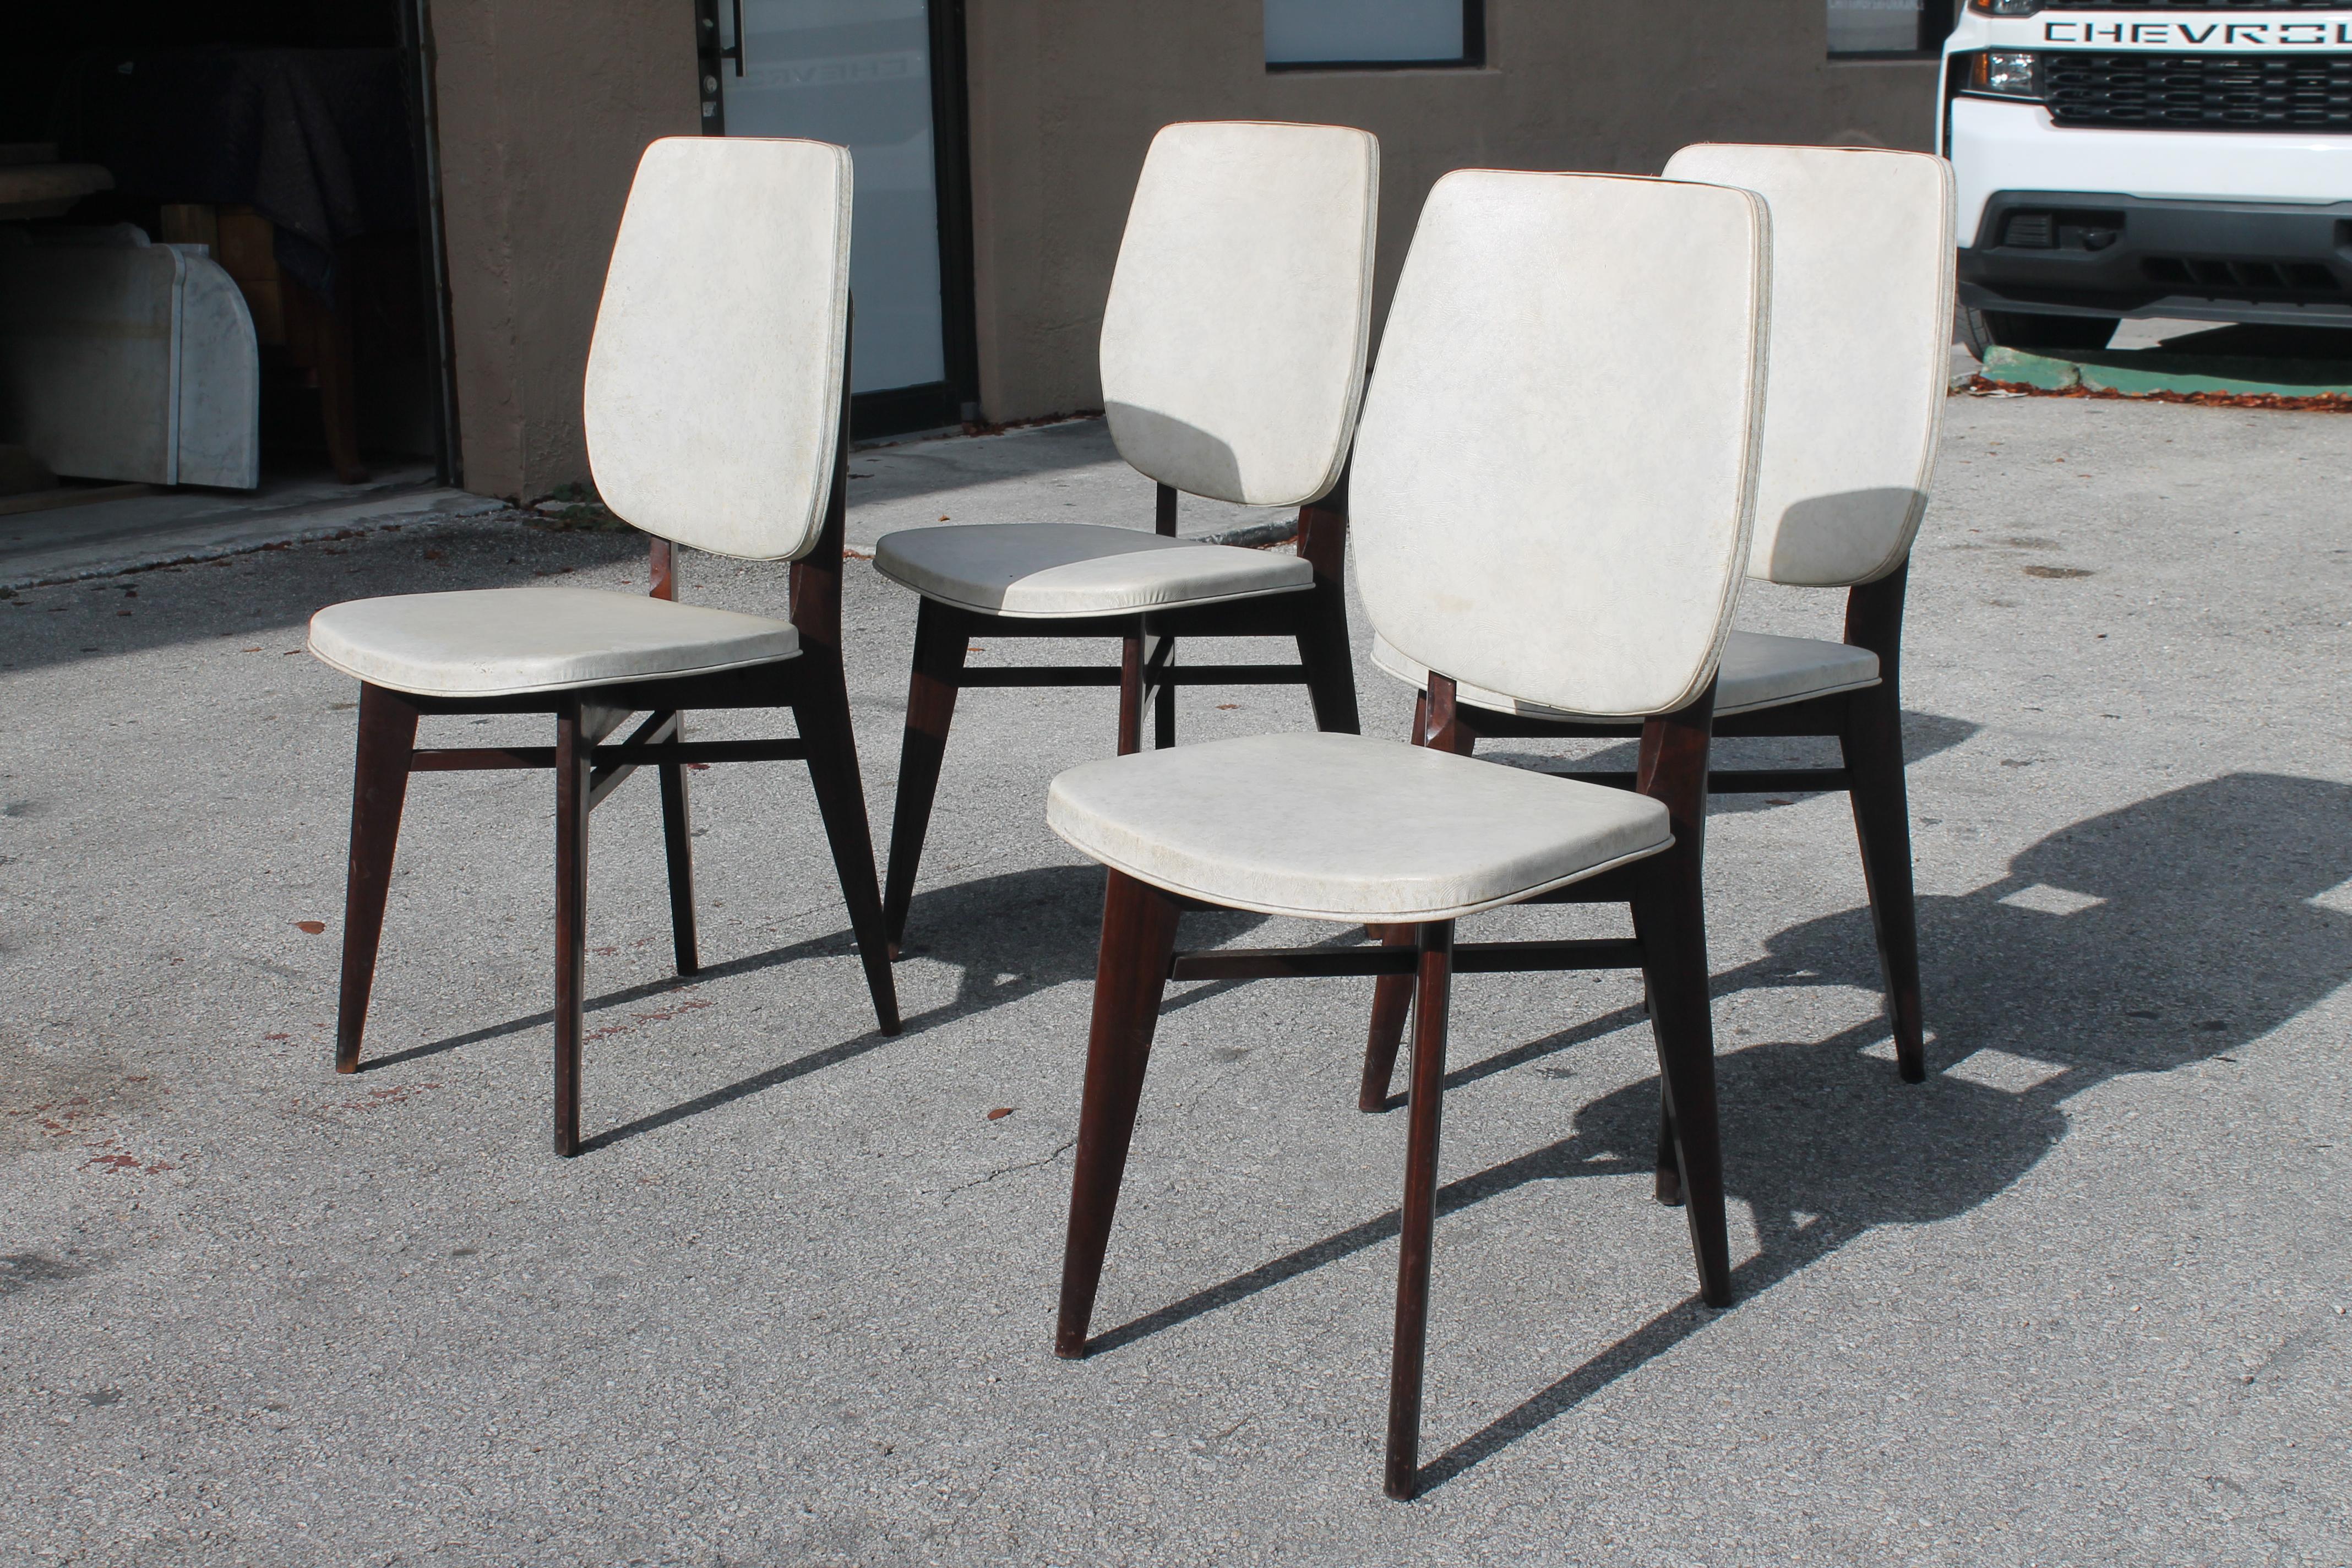 Set of 4 French Mid Century Modern Dining Chairs. As with all of our vintage seating we recommend reupholstery.